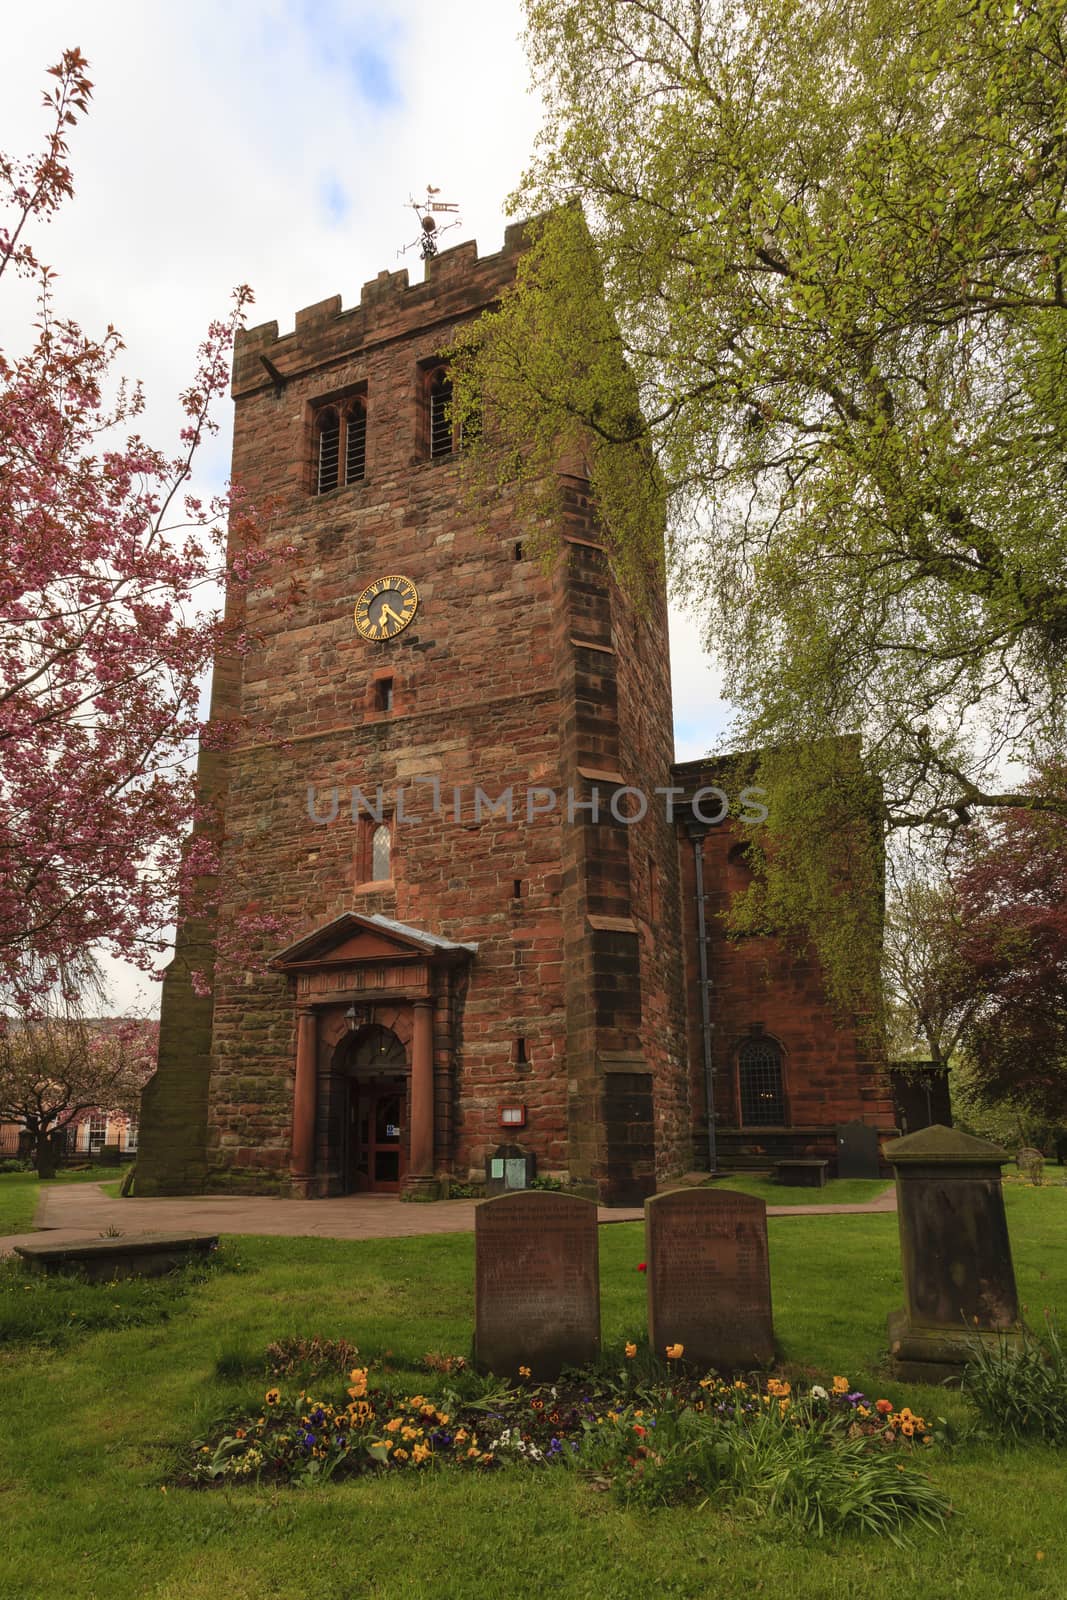 St Andrew's Church is an Anglican church situated in Penrith, Cumbria in northern England and is a grade 1 listed building.  The tower dates from the 12th and 13th century.